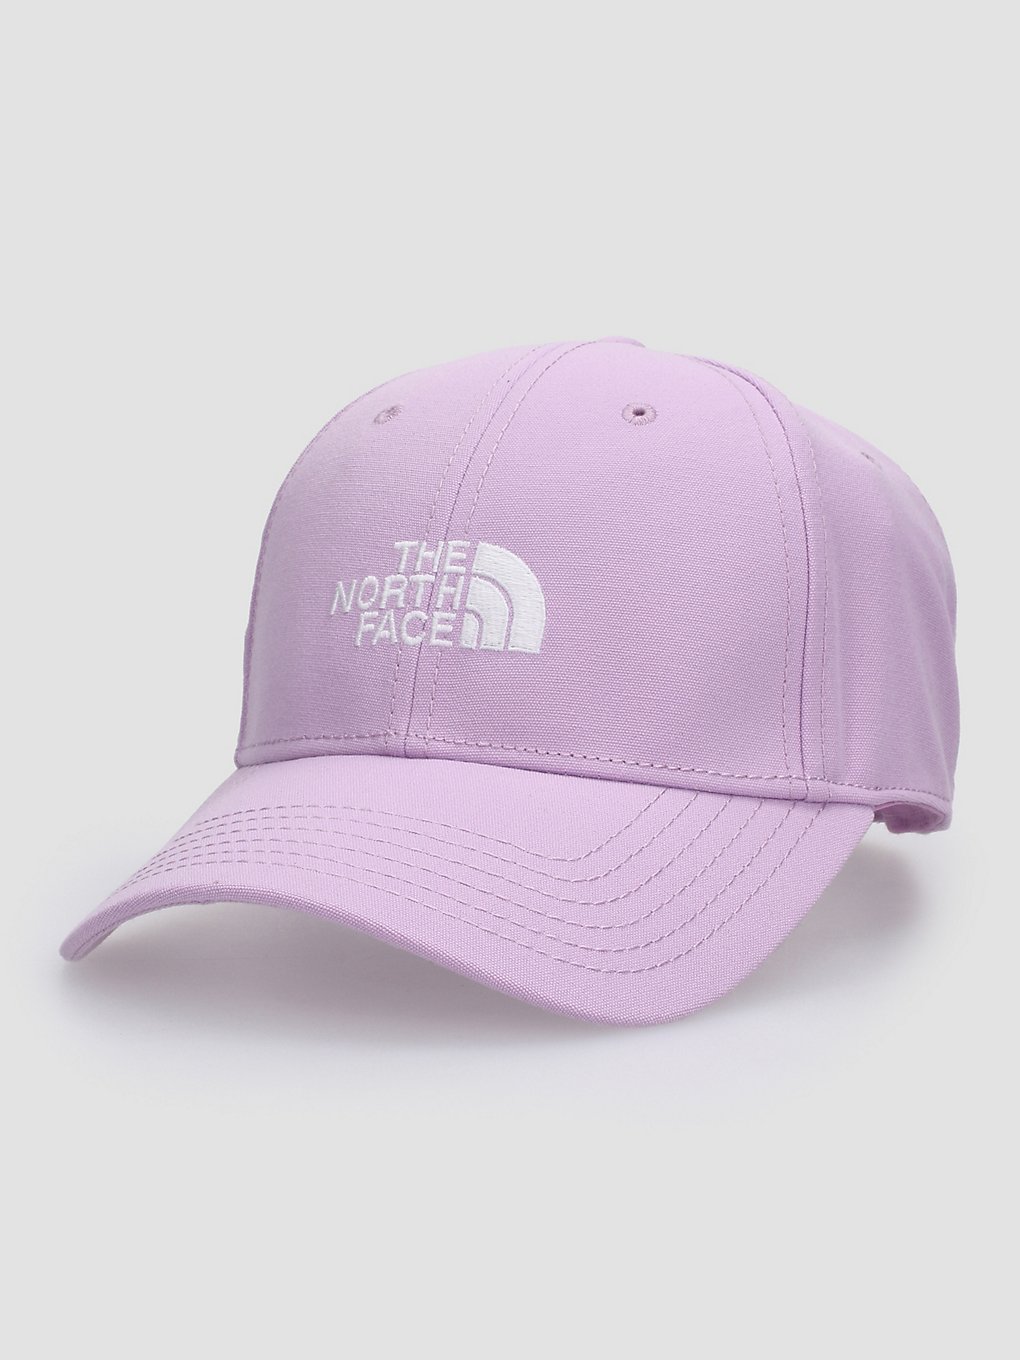 THE NORTH FACE Recycled 66 Classic Cap lupine